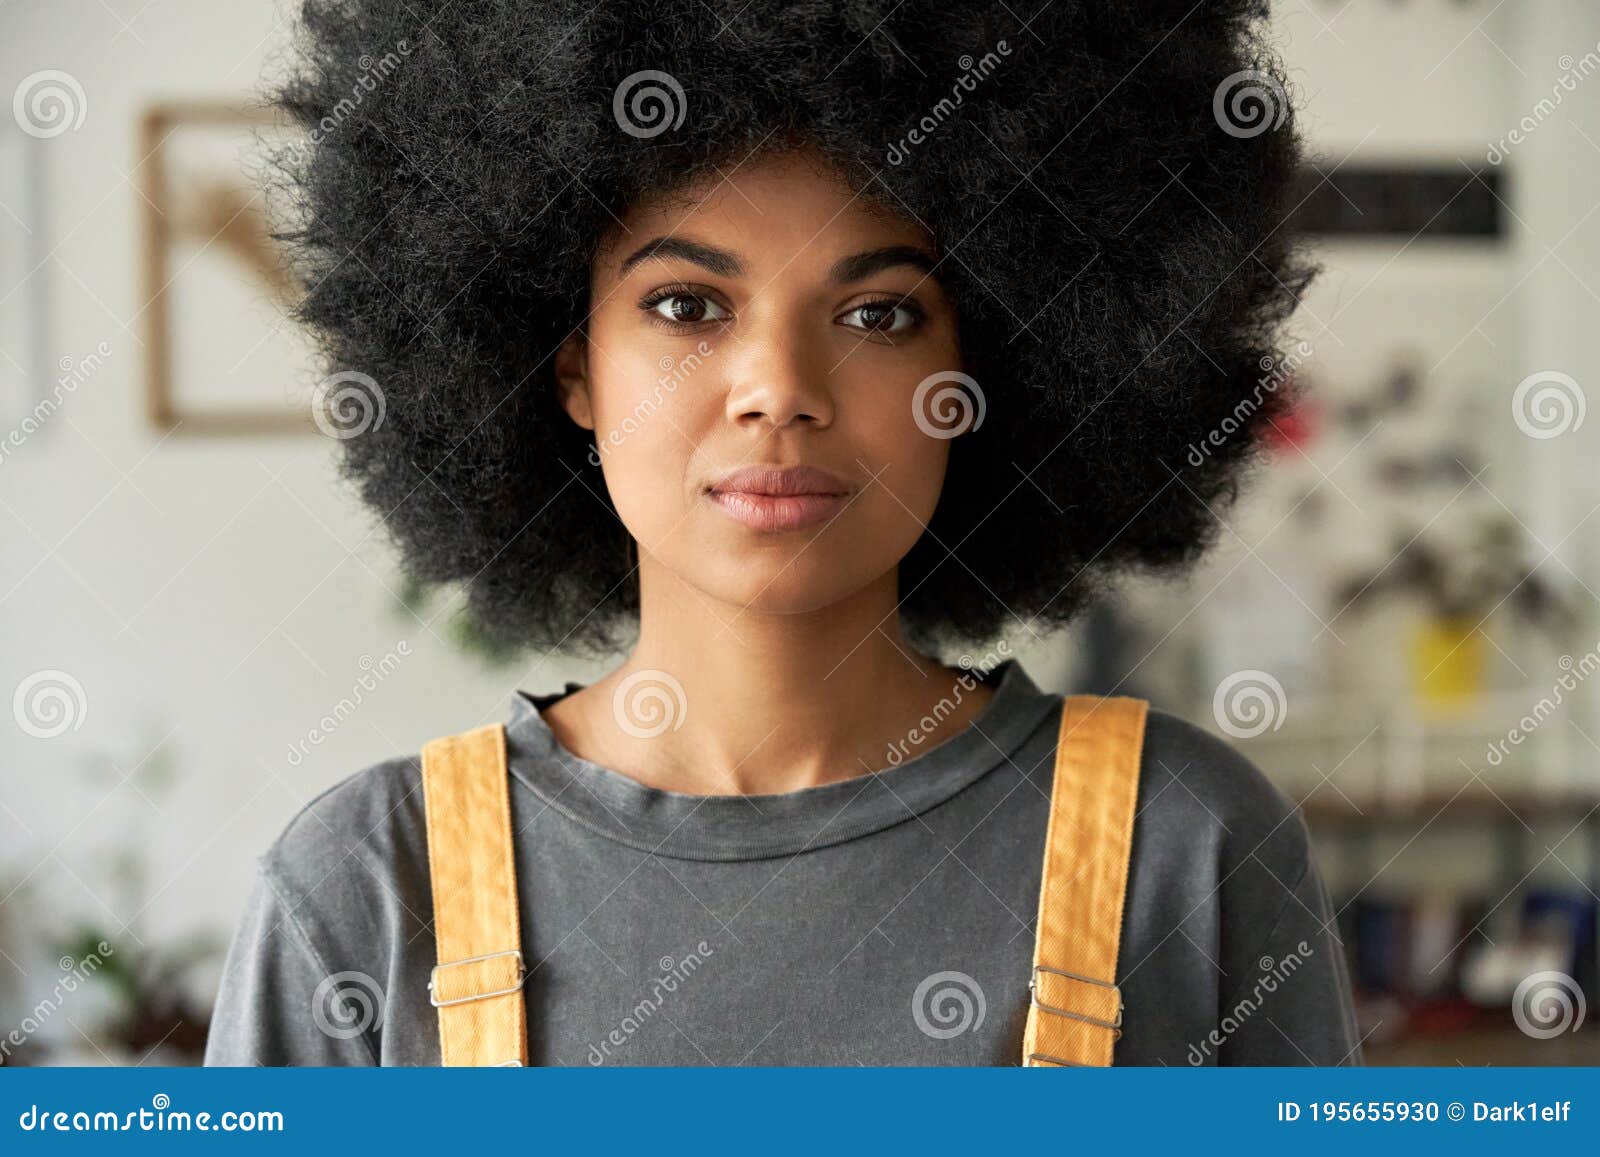 Confident African Woman with Afro Hair Looks at Camera, Headshot Portrait.  Stock Photo - Image of black, ethnic: 195655930